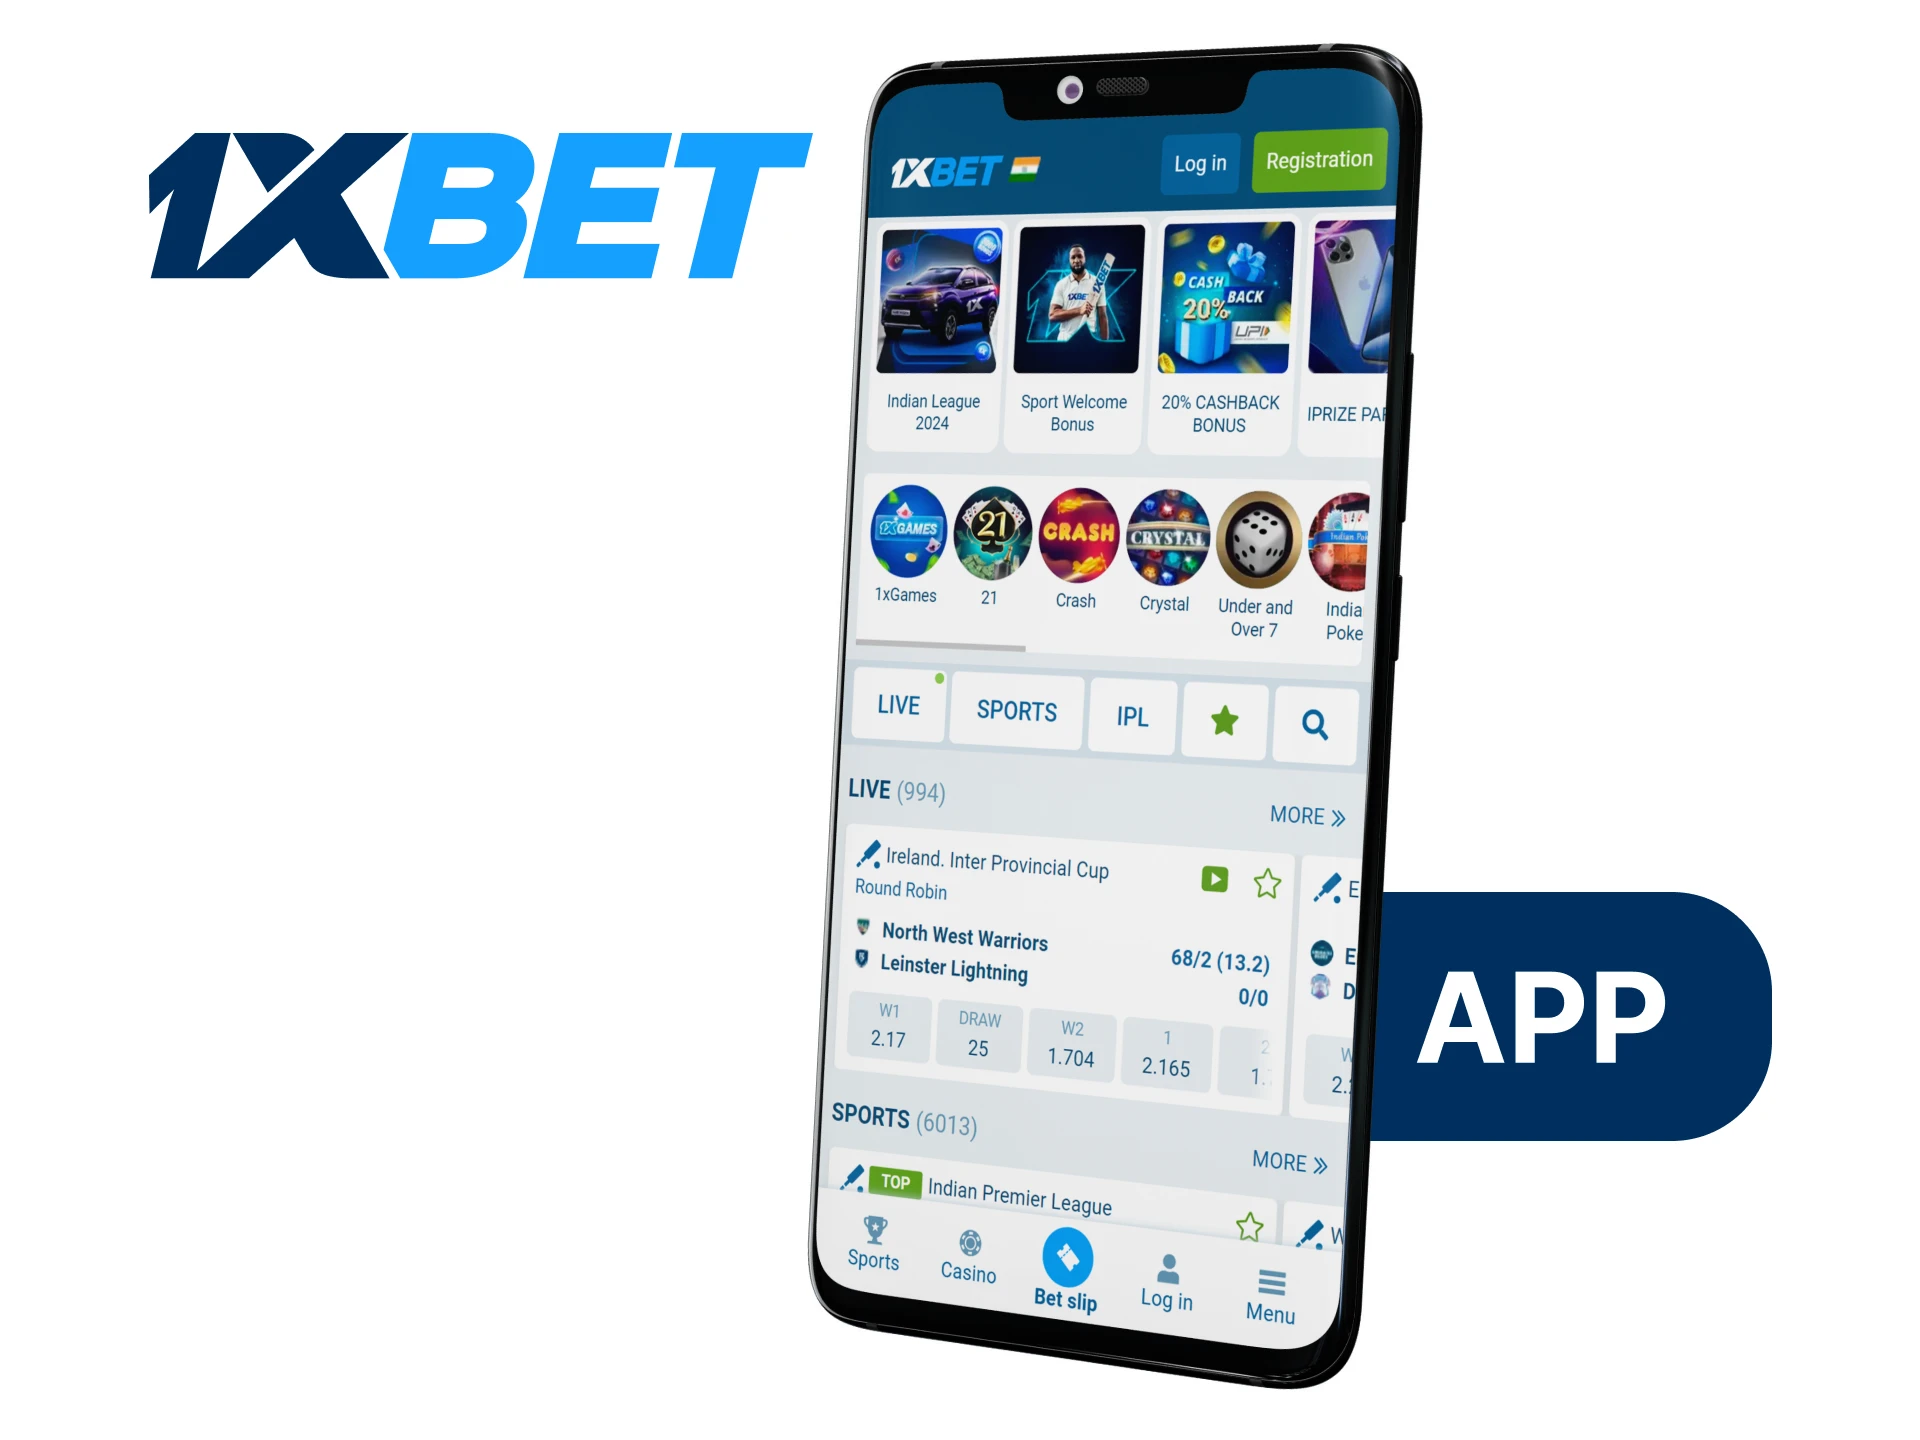 Betting on cricket has become easier with the mobile application from 1xBet.